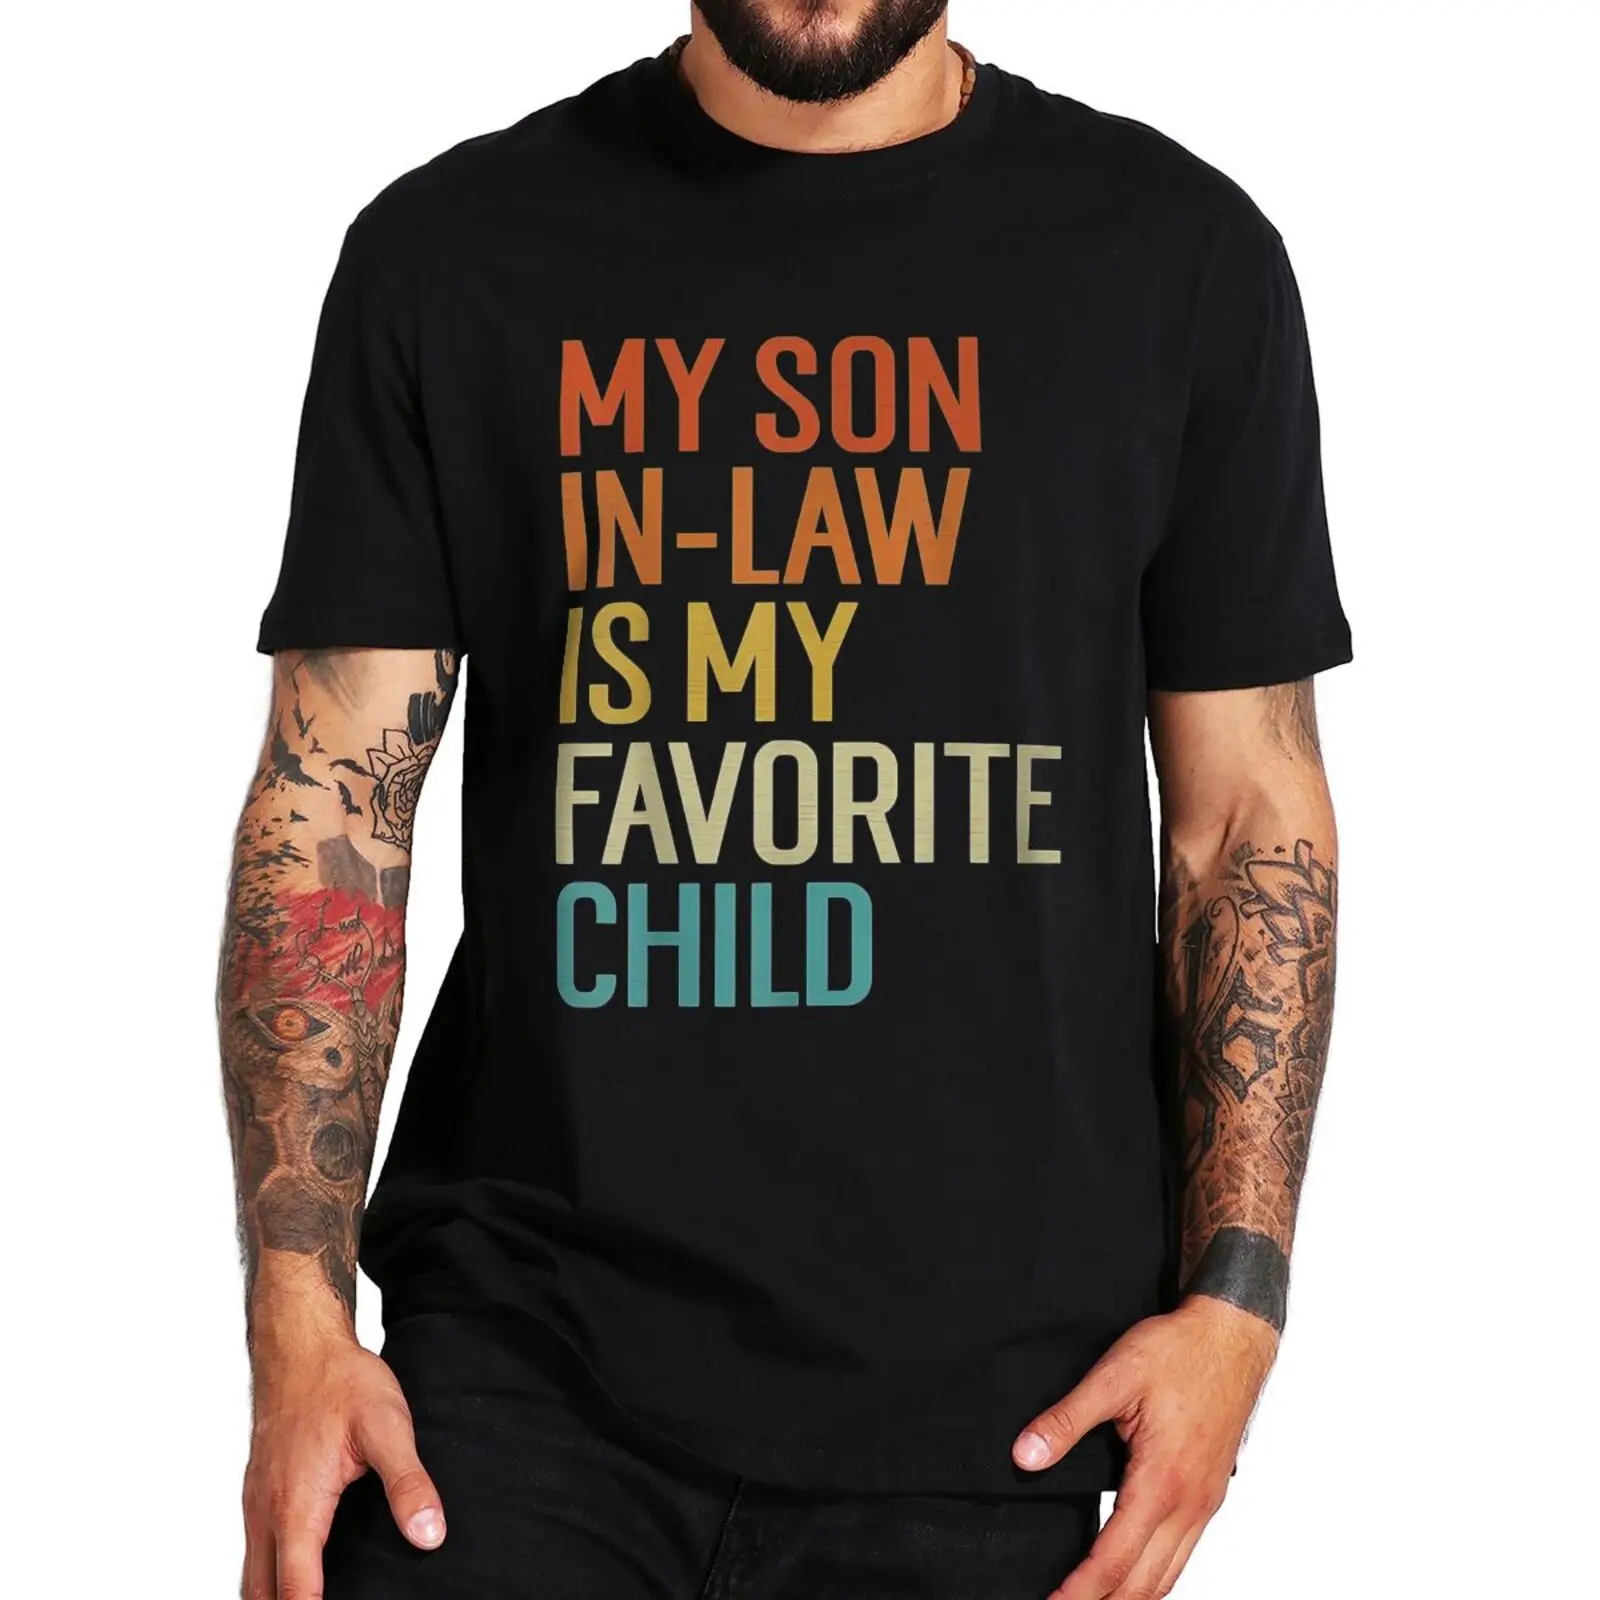 

My Son In-Law Is My Favorite Child T Shirt Funny Family Humor Retro Tops O-neck 100% Cotton Unisex Summer Casual T-shirts